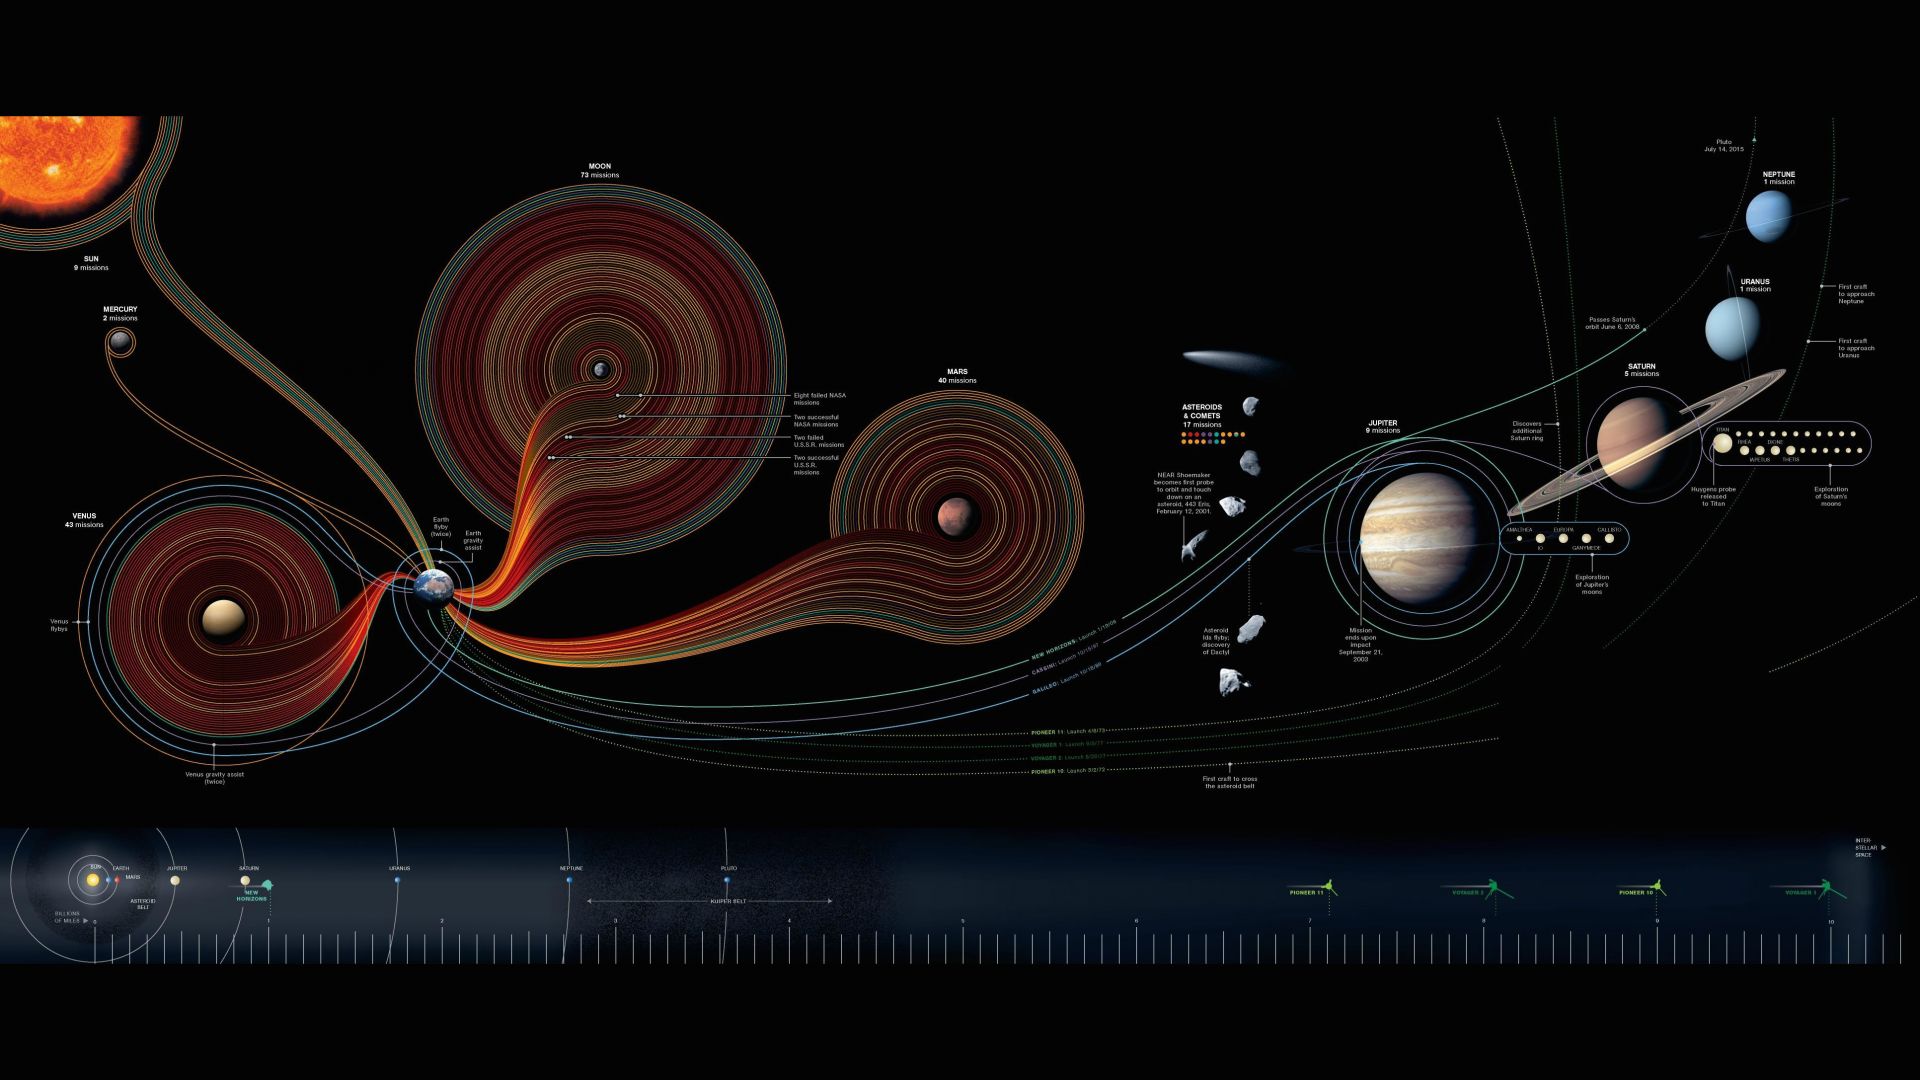 solar system, map, National Geographic (horizontal)